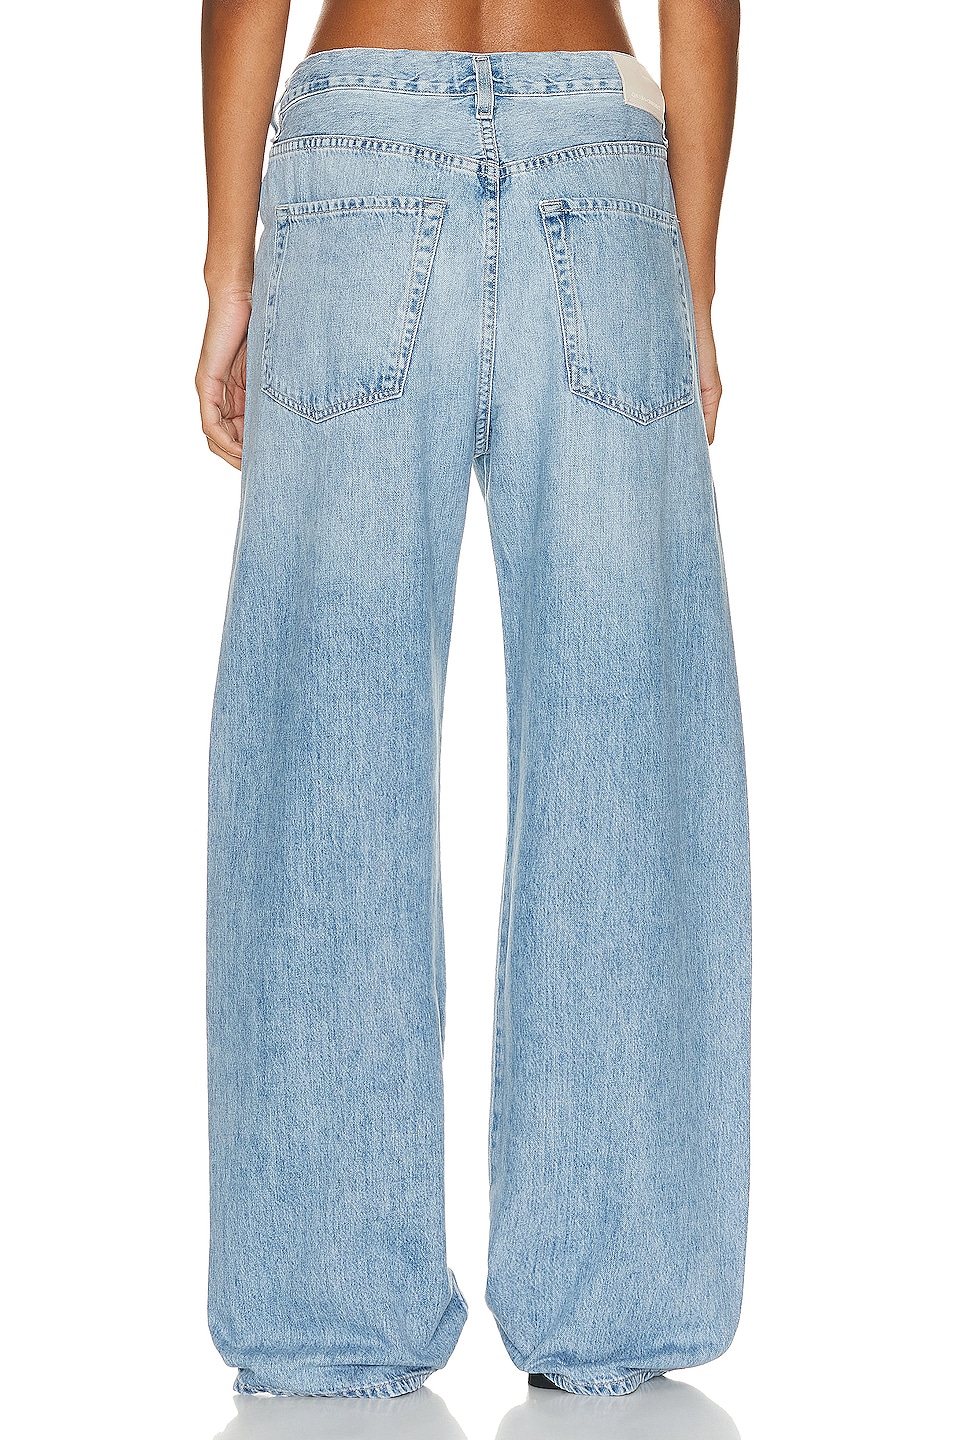 Citizens of Humanity Brynn Drawstring Trouser in Blue Lace | FWRD